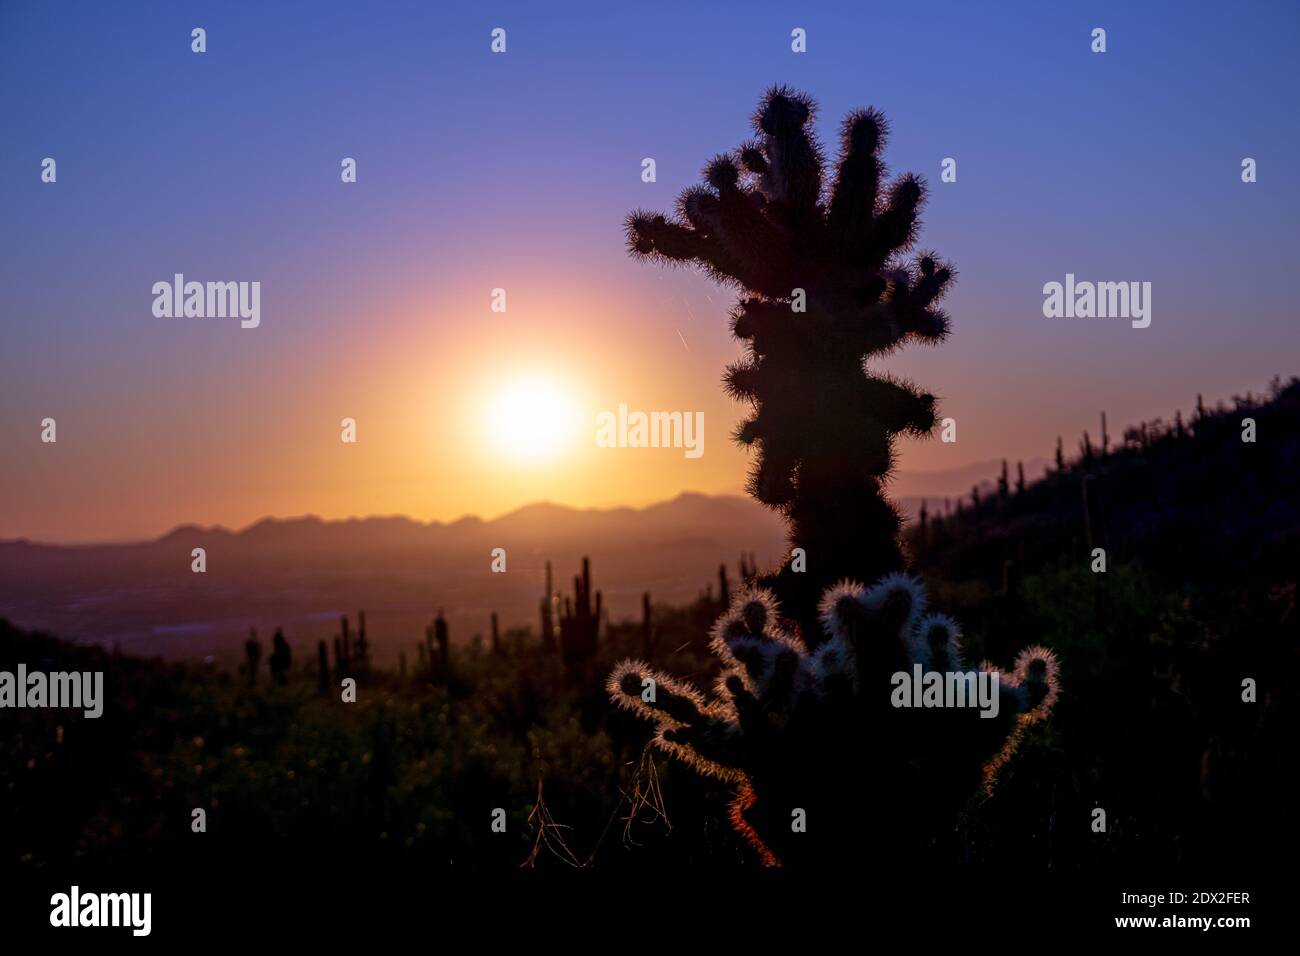 Silhouette Cholla Cactus Against Sky During Sunset Stock Photo